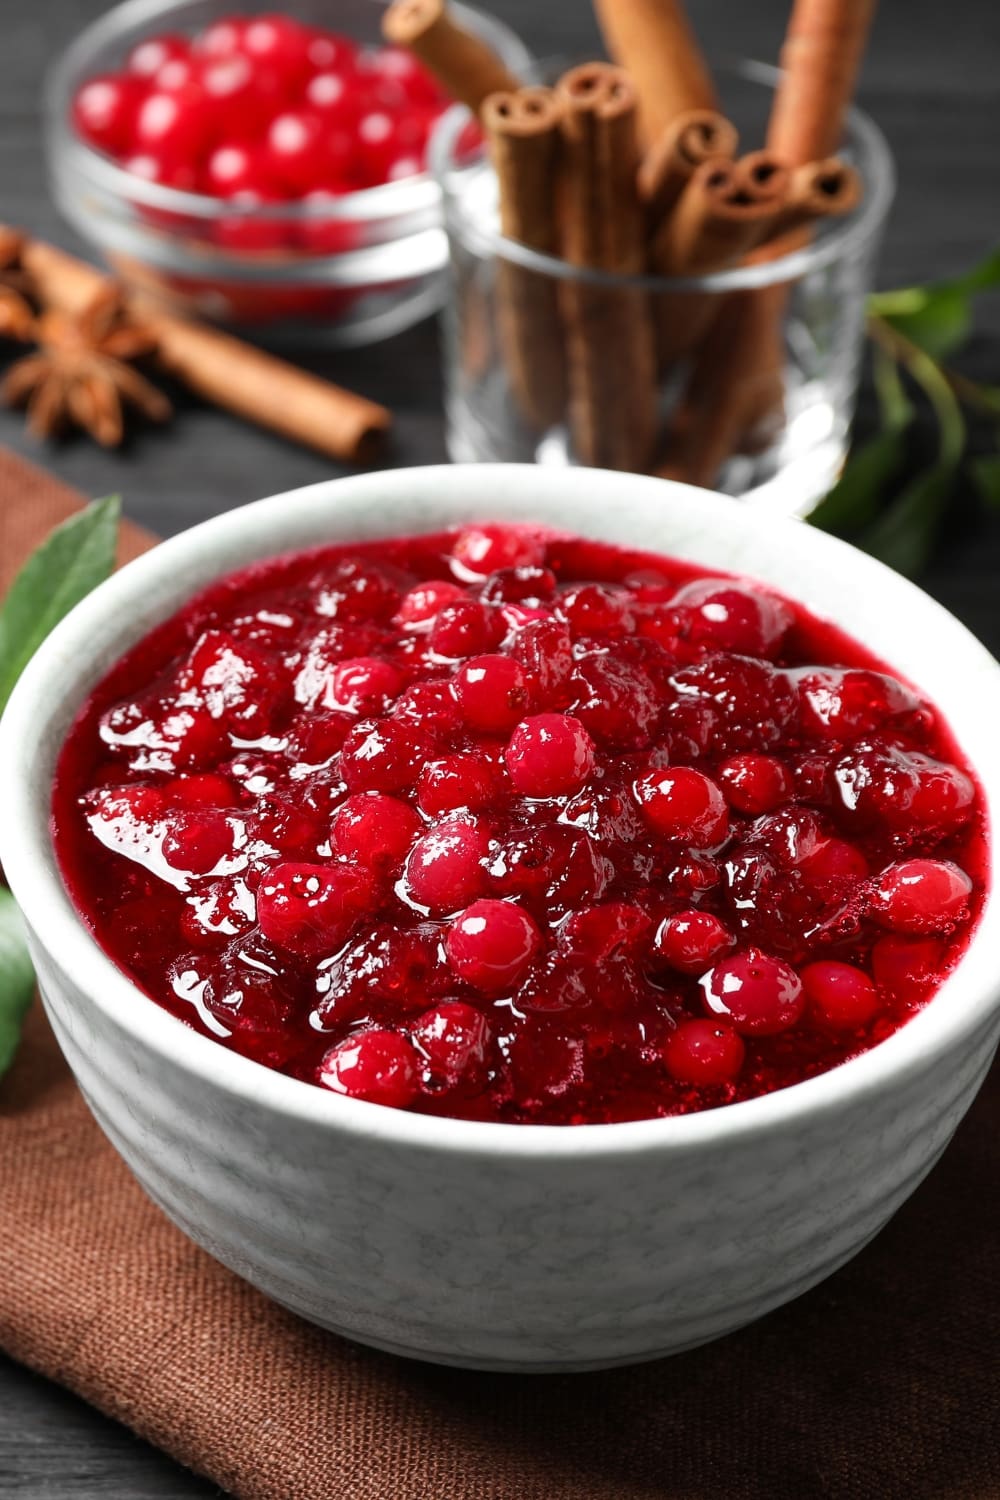 Bowl of cranberry sauces, dried cinnamon sticks and spices on the background